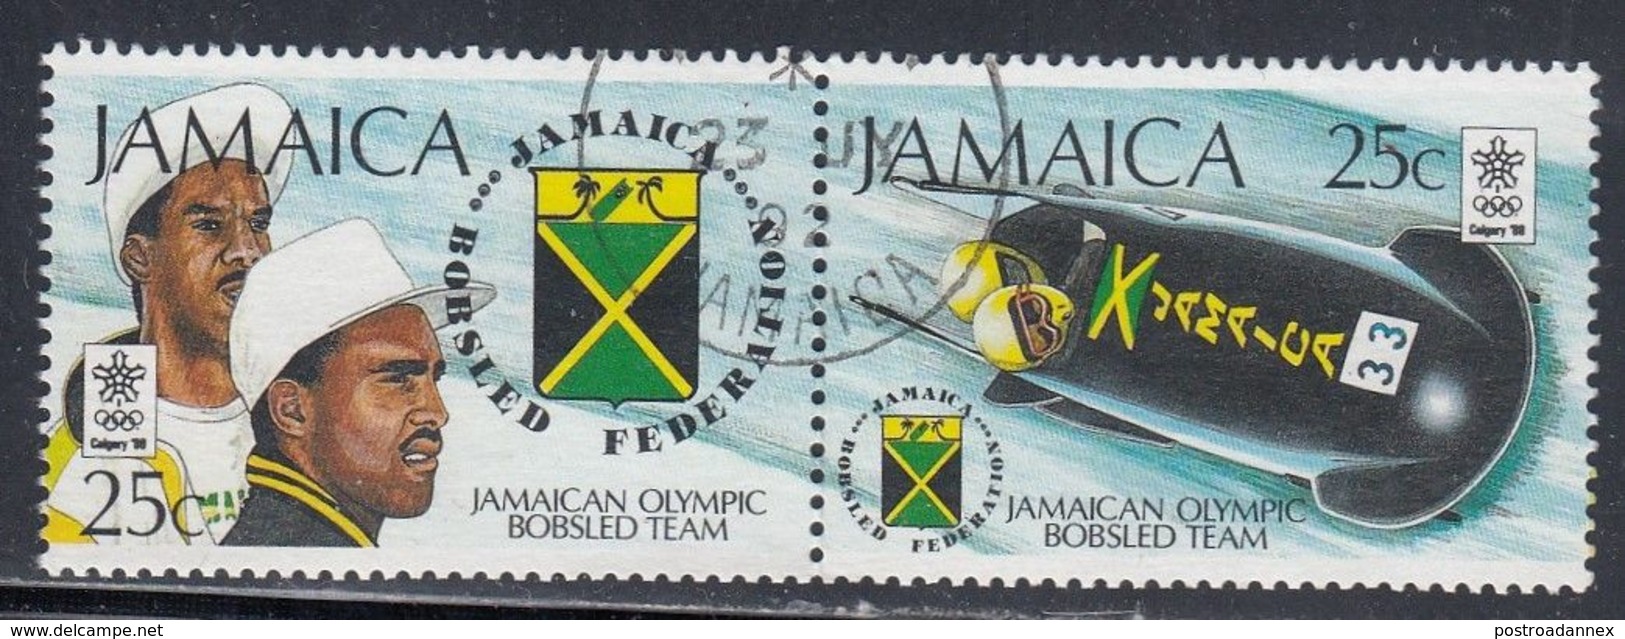 Jamaica, Scott #699a, Used, Olympic Bobsled Team, Issued 1988 - Jamaica (1962-...)